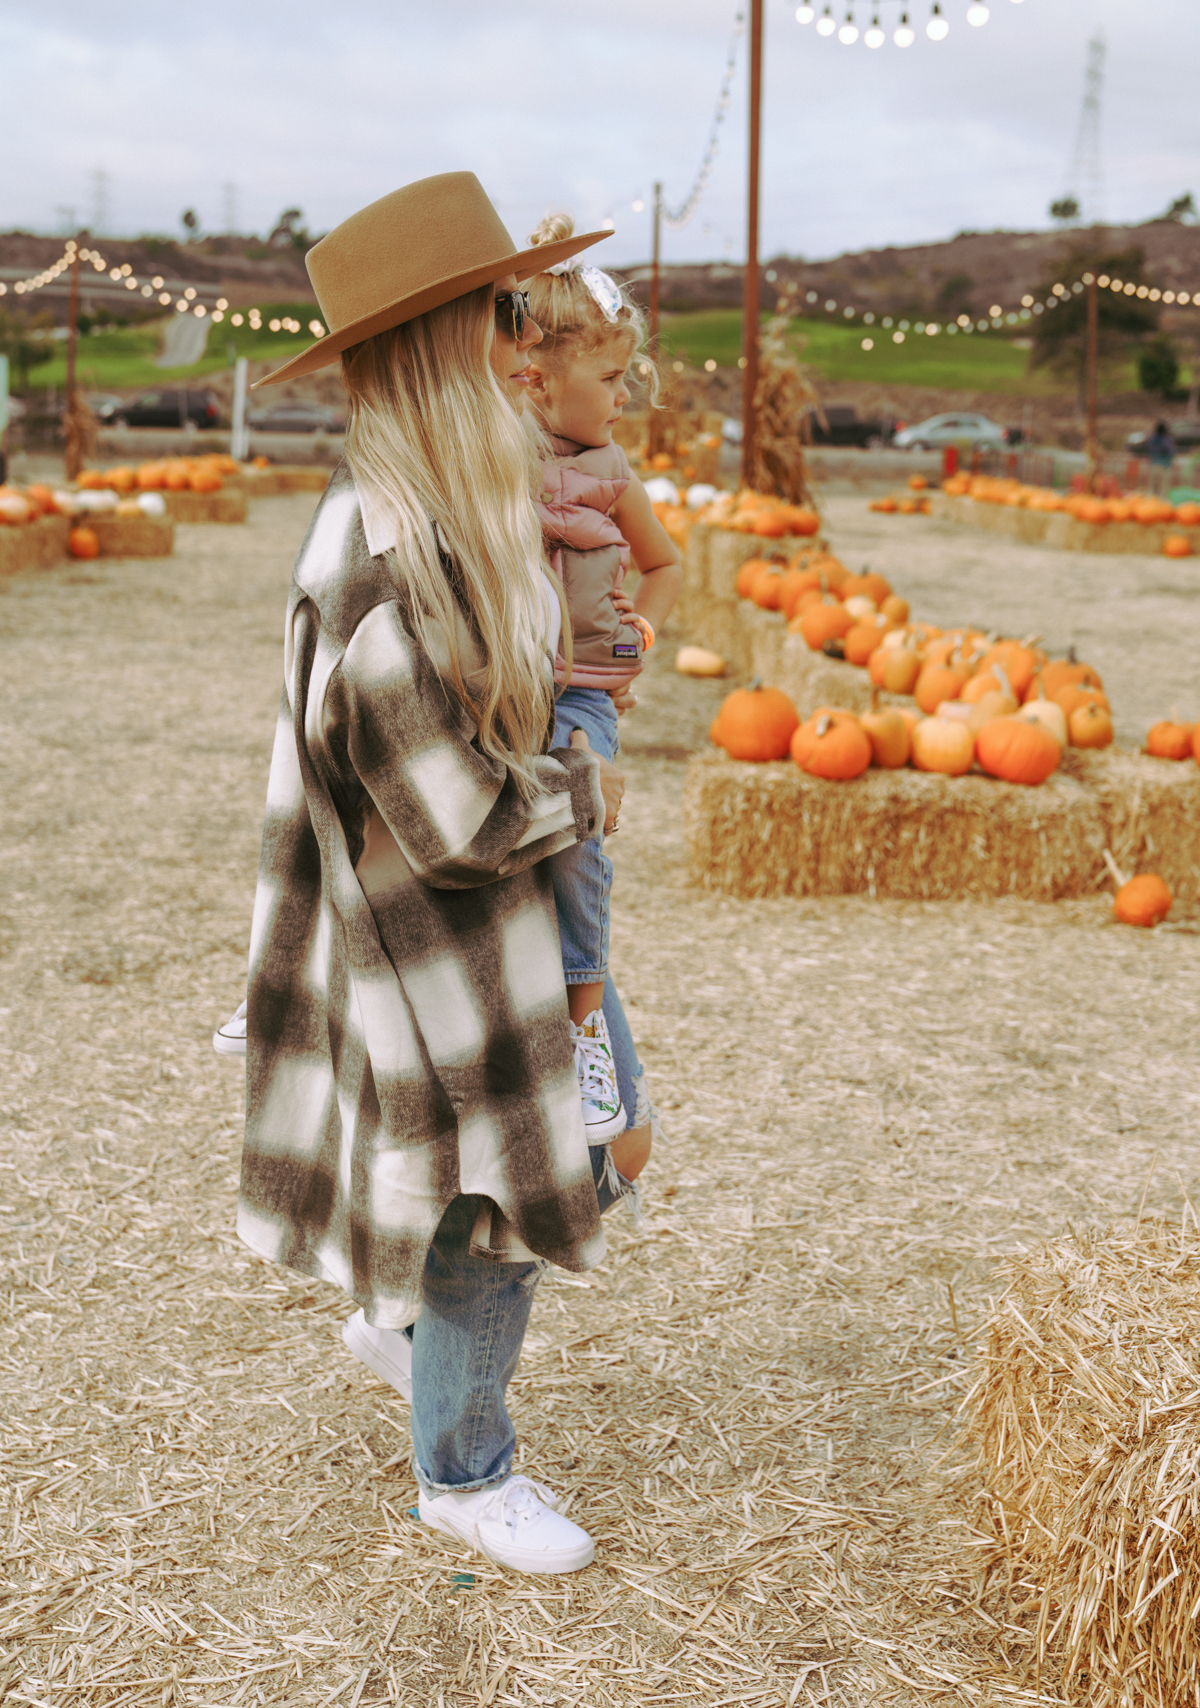 What to wear to pumpkin patches